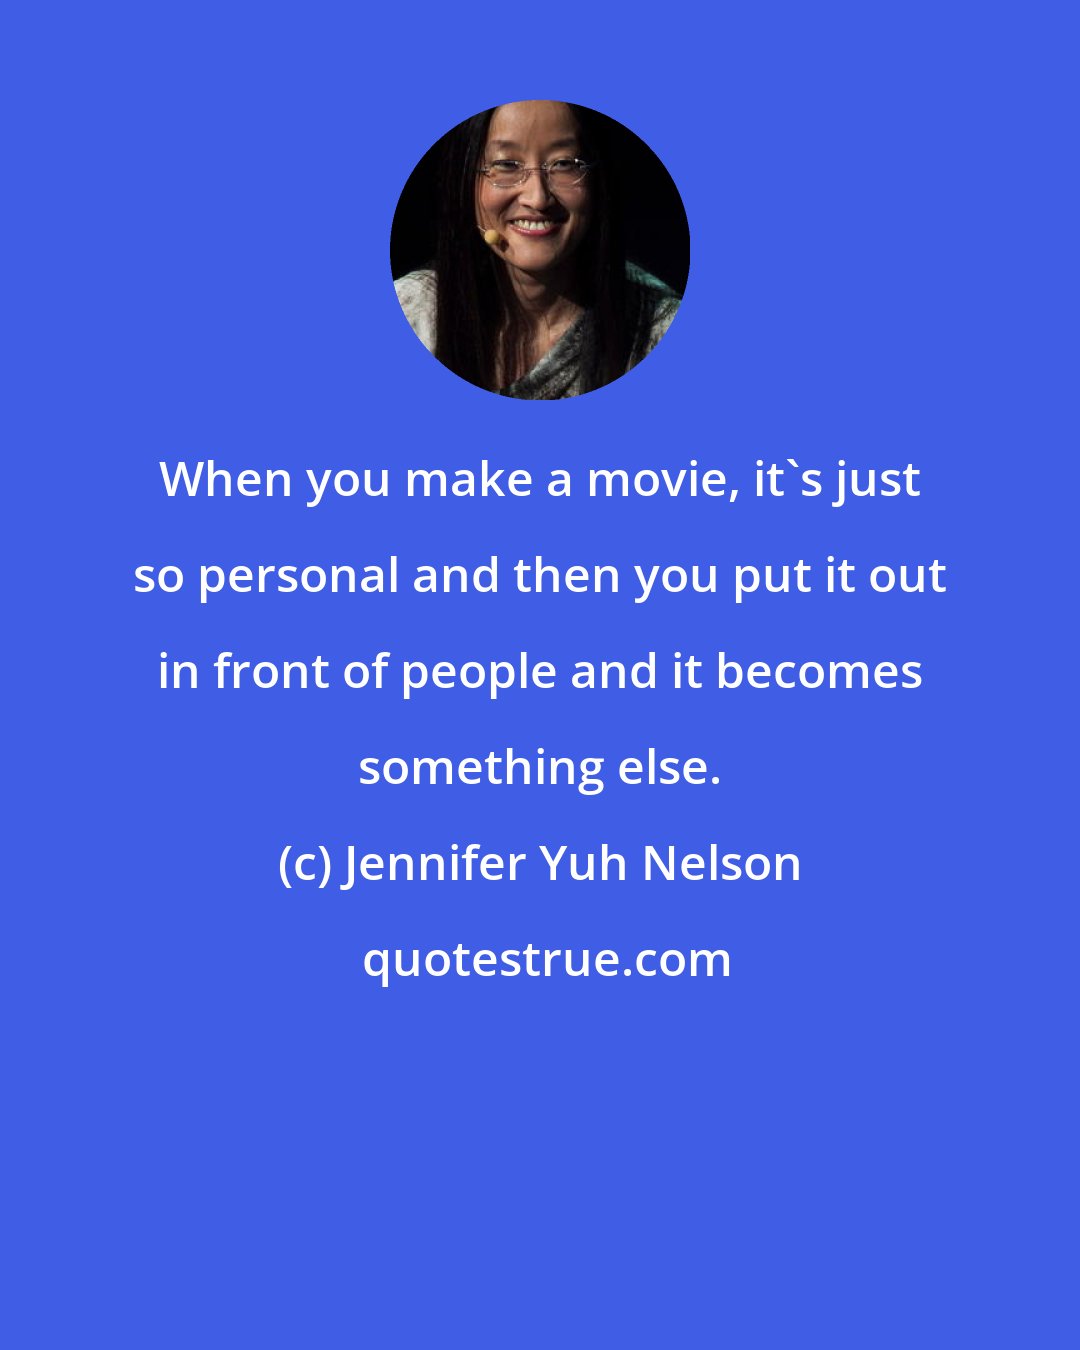 Jennifer Yuh Nelson: When you make a movie, it's just so personal and then you put it out in front of people and it becomes something else.